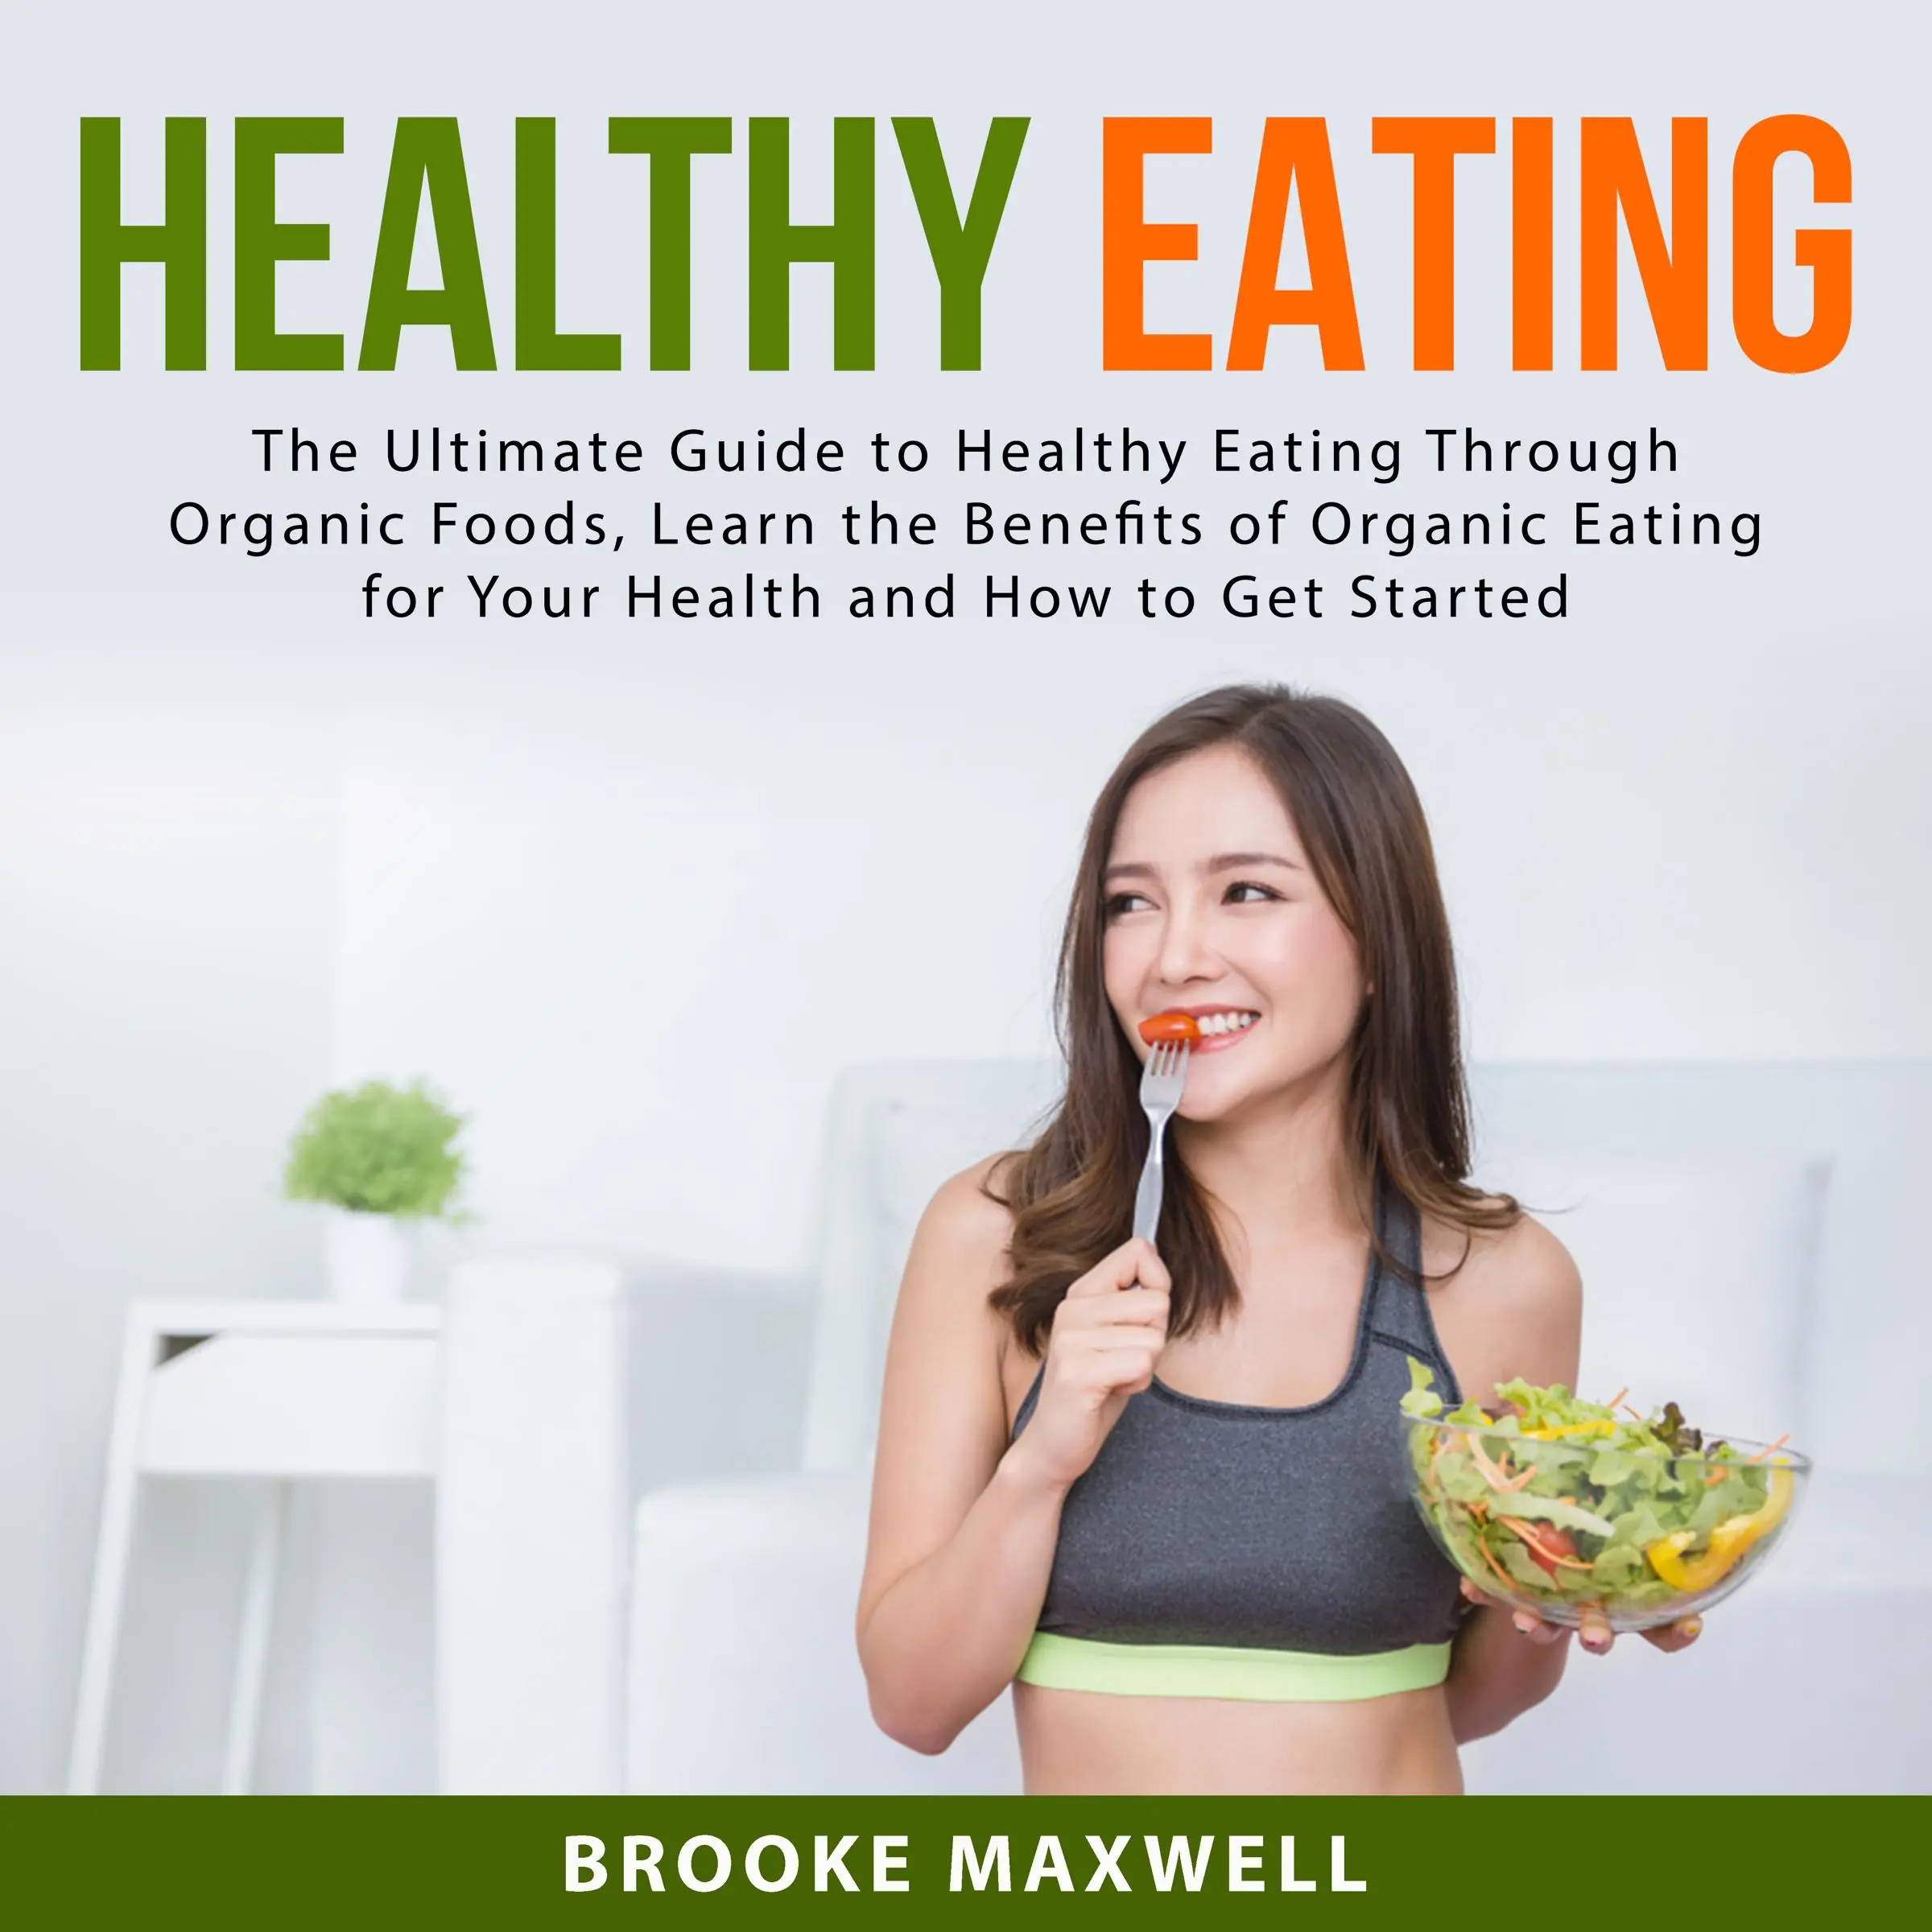 Healthy Eating: The Ultimate Guide to Healthy Eating Through Organic Foods, Learn the Benefits of Organic Eating for Your Health and How to Get Started Audiobook by Brooke Maxwell